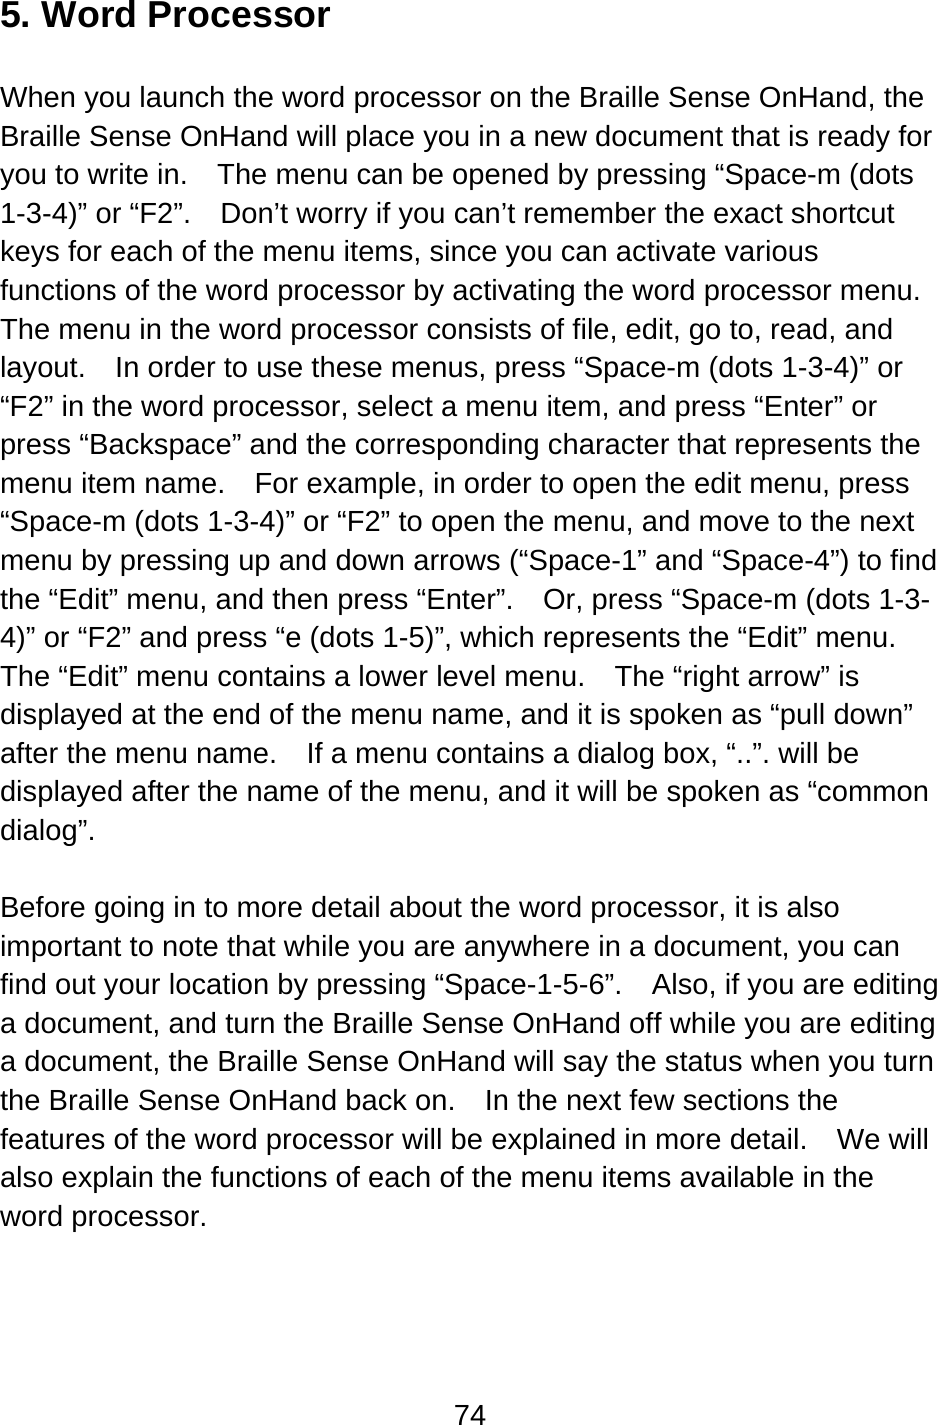 74  5. Word Processor  When you launch the word processor on the Braille Sense OnHand, the Braille Sense OnHand will place you in a new document that is ready for you to write in.    The menu can be opened by pressing “Space-m (dots 1-3-4)” or “F2”.    Don’t worry if you can’t remember the exact shortcut keys for each of the menu items, since you can activate various functions of the word processor by activating the word processor menu.   The menu in the word processor consists of file, edit, go to, read, and layout.    In order to use these menus, press “Space-m (dots 1-3-4)” or “F2” in the word processor, select a menu item, and press “Enter” or press “Backspace” and the corresponding character that represents the menu item name.    For example, in order to open the edit menu, press “Space-m (dots 1-3-4)” or “F2” to open the menu, and move to the next menu by pressing up and down arrows (“Space-1” and “Space-4”) to find the “Edit” menu, and then press “Enter”.  Or, press “Space-m (dots 1-3-4)” or “F2” and press “e (dots 1-5)”, which represents the “Edit” menu.   The “Edit” menu contains a lower level menu.    The “right arrow” is displayed at the end of the menu name, and it is spoken as “pull down” after the menu name.    If a menu contains a dialog box, “..”. will be displayed after the name of the menu, and it will be spoken as “common dialog”.  Before going in to more detail about the word processor, it is also important to note that while you are anywhere in a document, you can find out your location by pressing “Space-1-5-6”.  Also, if you are editing a document, and turn the Braille Sense OnHand off while you are editing a document, the Braille Sense OnHand will say the status when you turn the Braille Sense OnHand back on.    In the next few sections the features of the word processor will be explained in more detail.    We will also explain the functions of each of the menu items available in the word processor.    